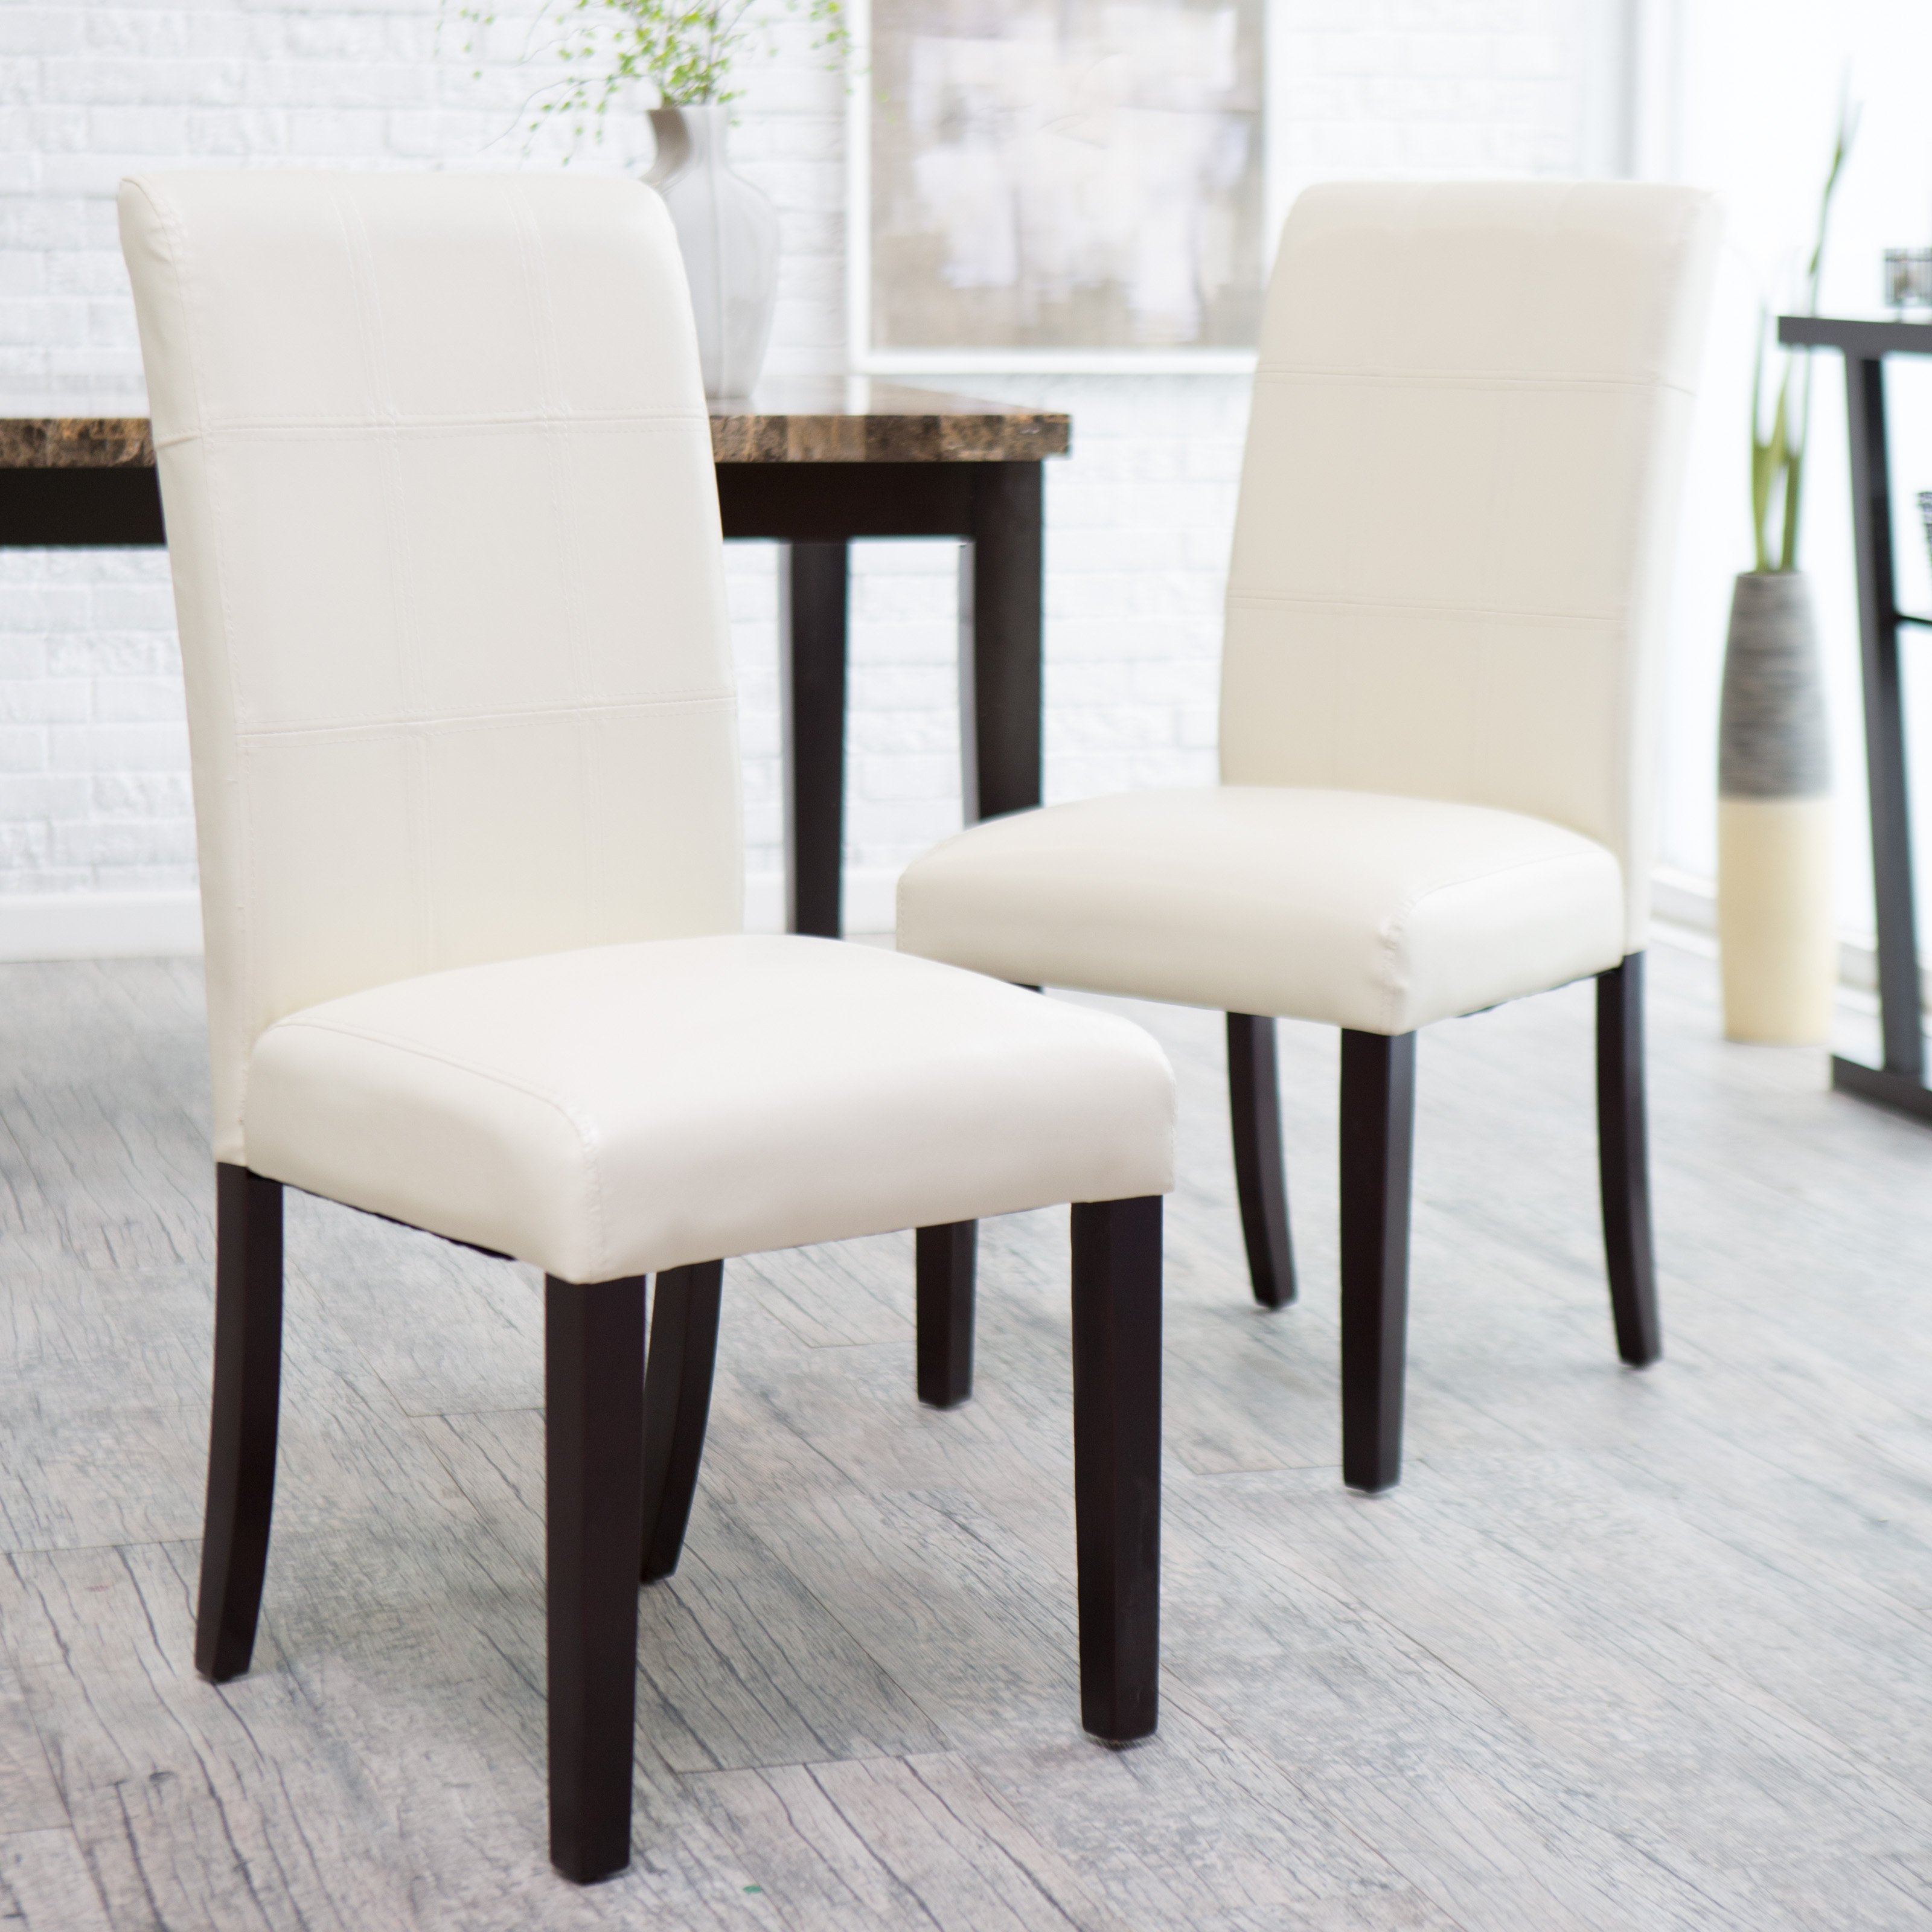 morgana tufted parsons dining chair - set of 2 |  Hayneedle XYBSNGF